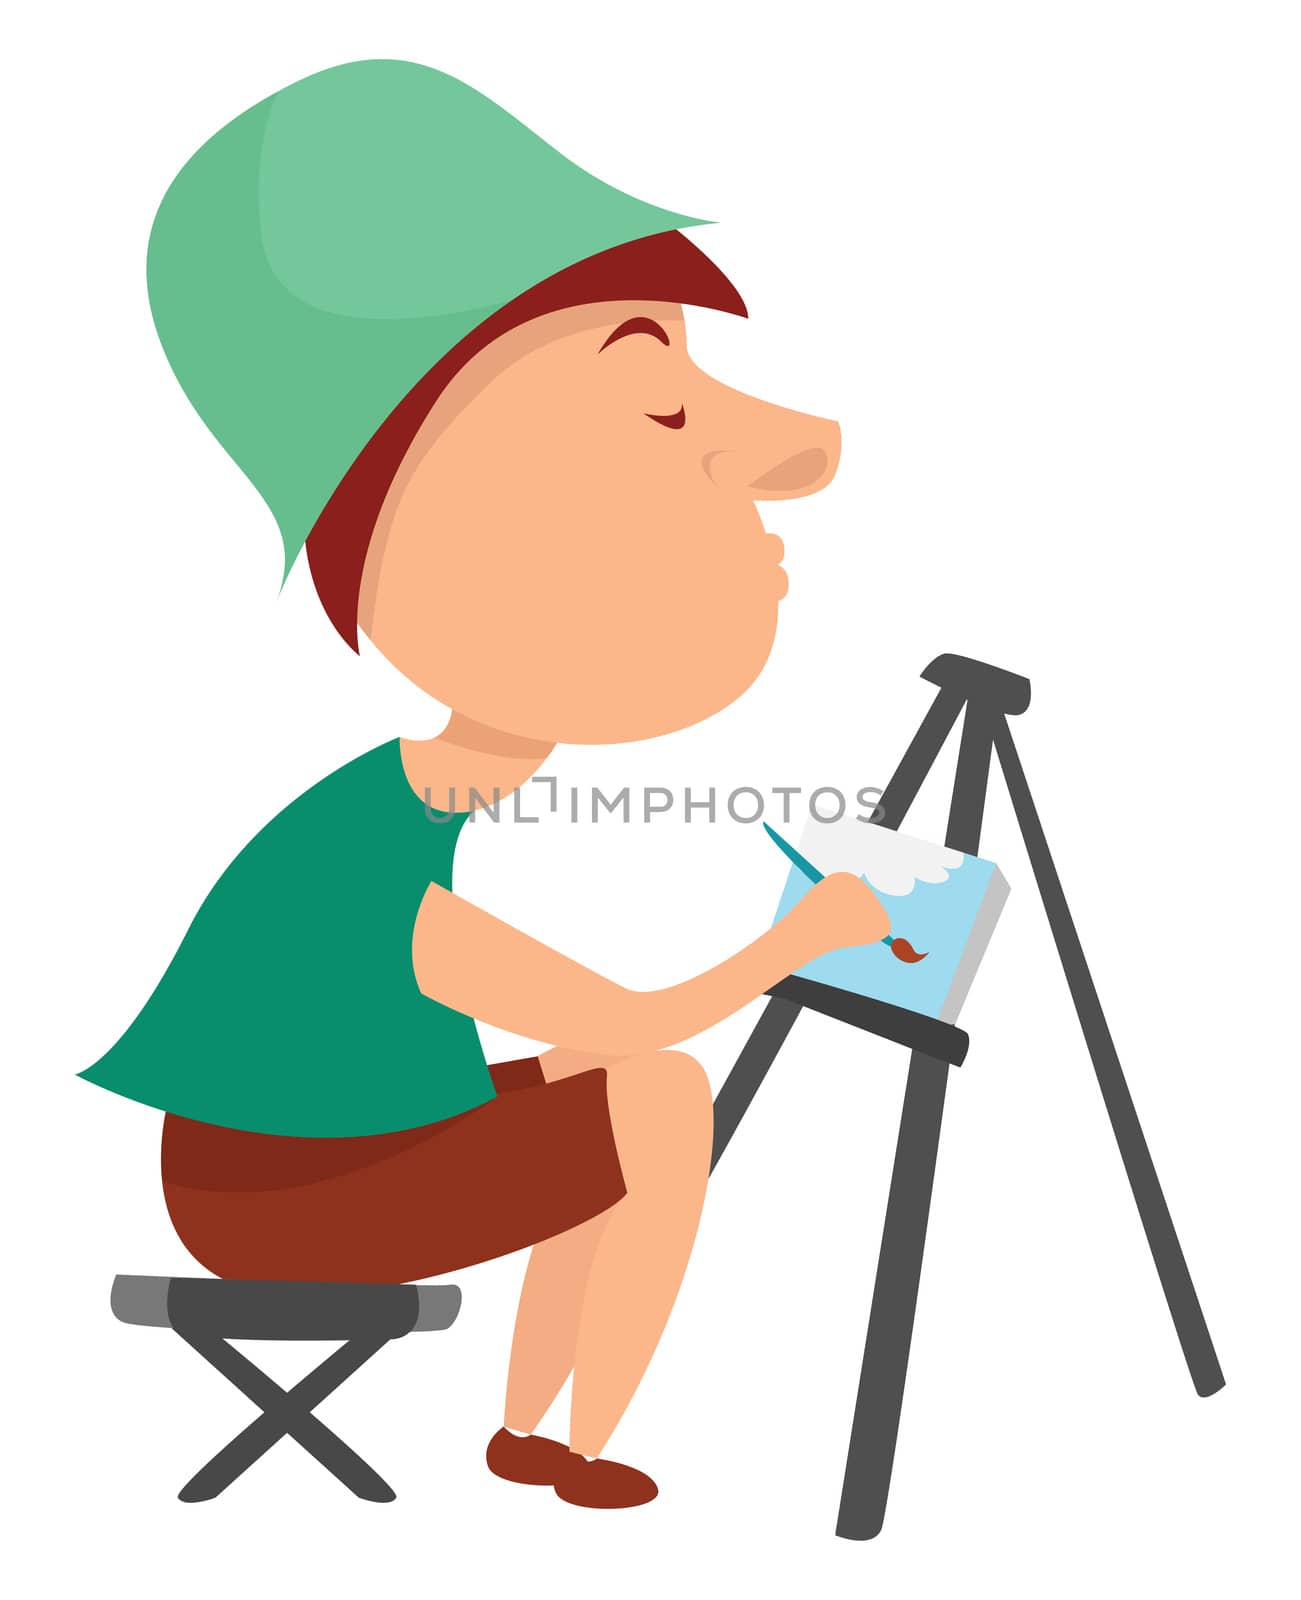 Plein air painting , illustration, vector on white background